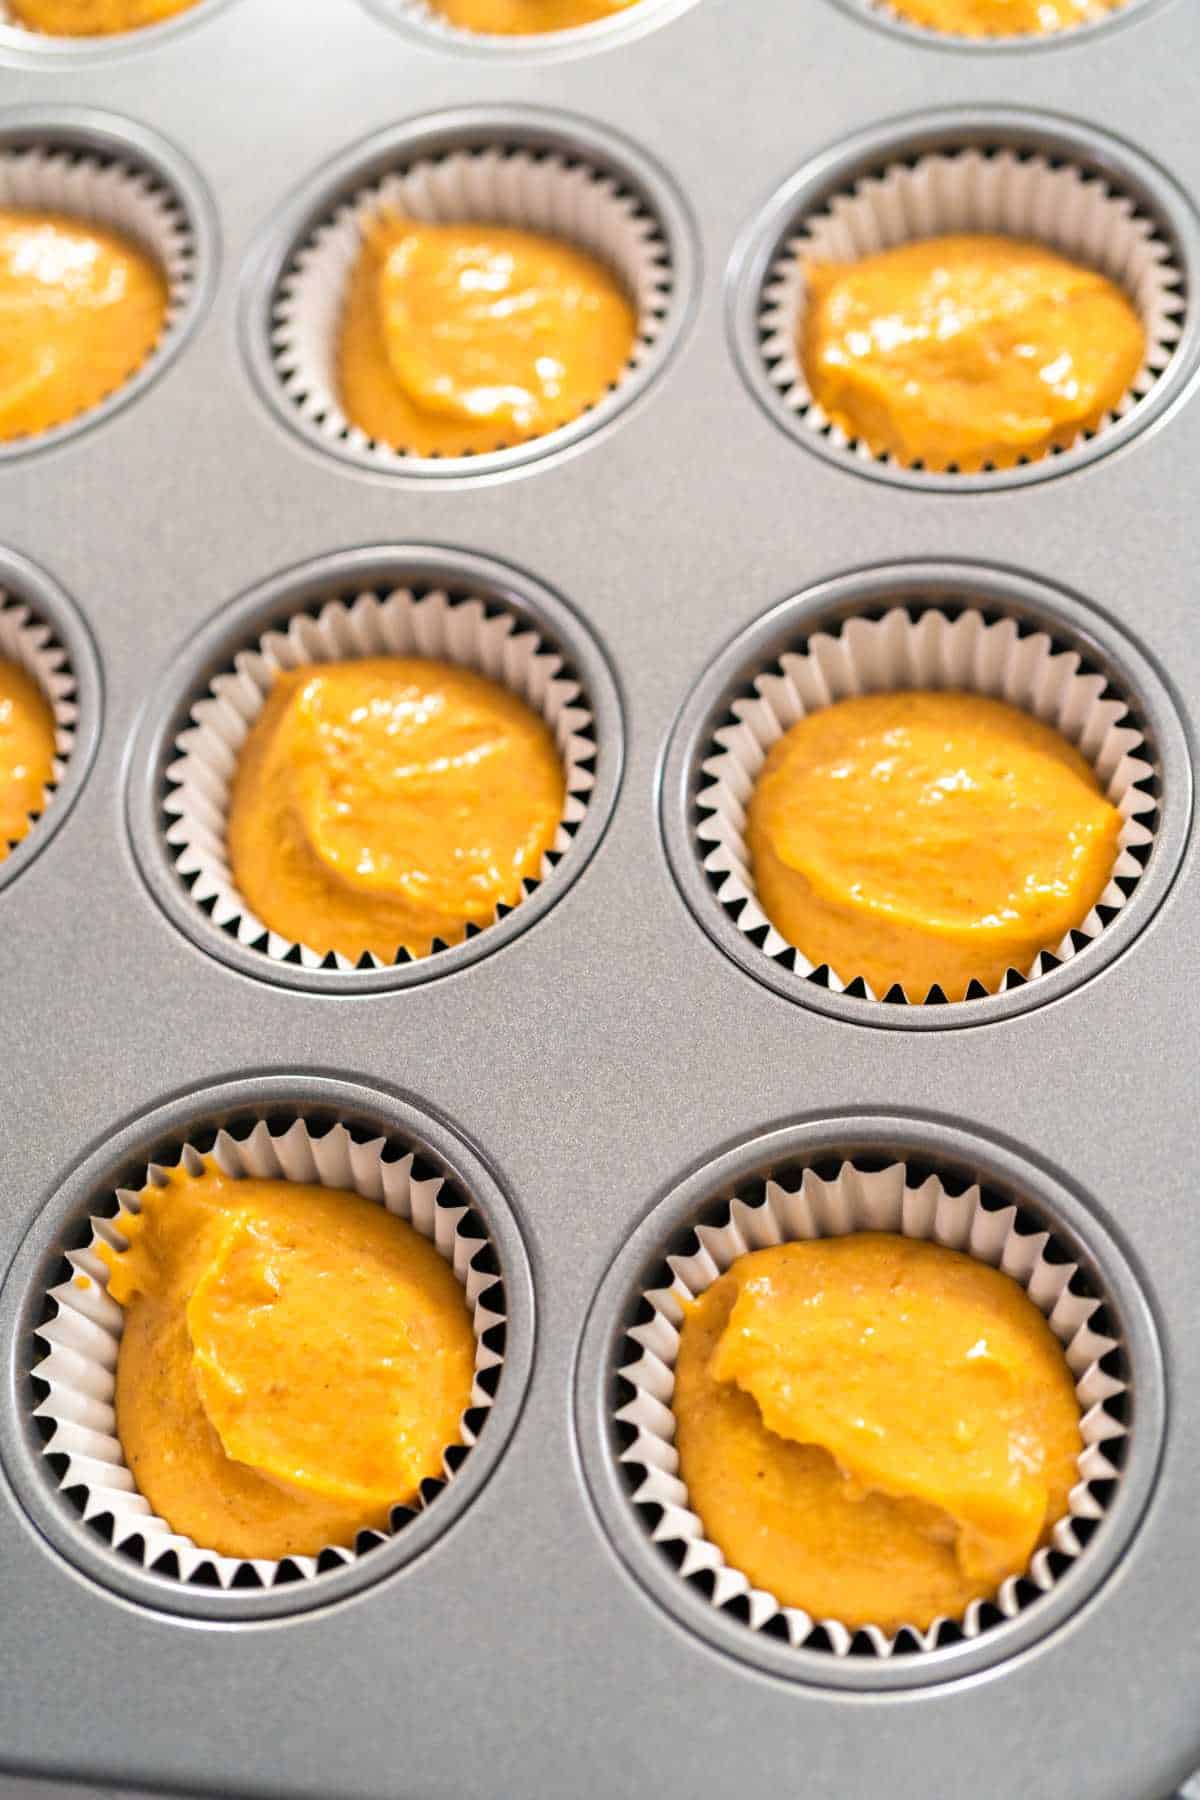 Peanut butter and pumpkin spice cupcake batter in a cupcake pan with liners.